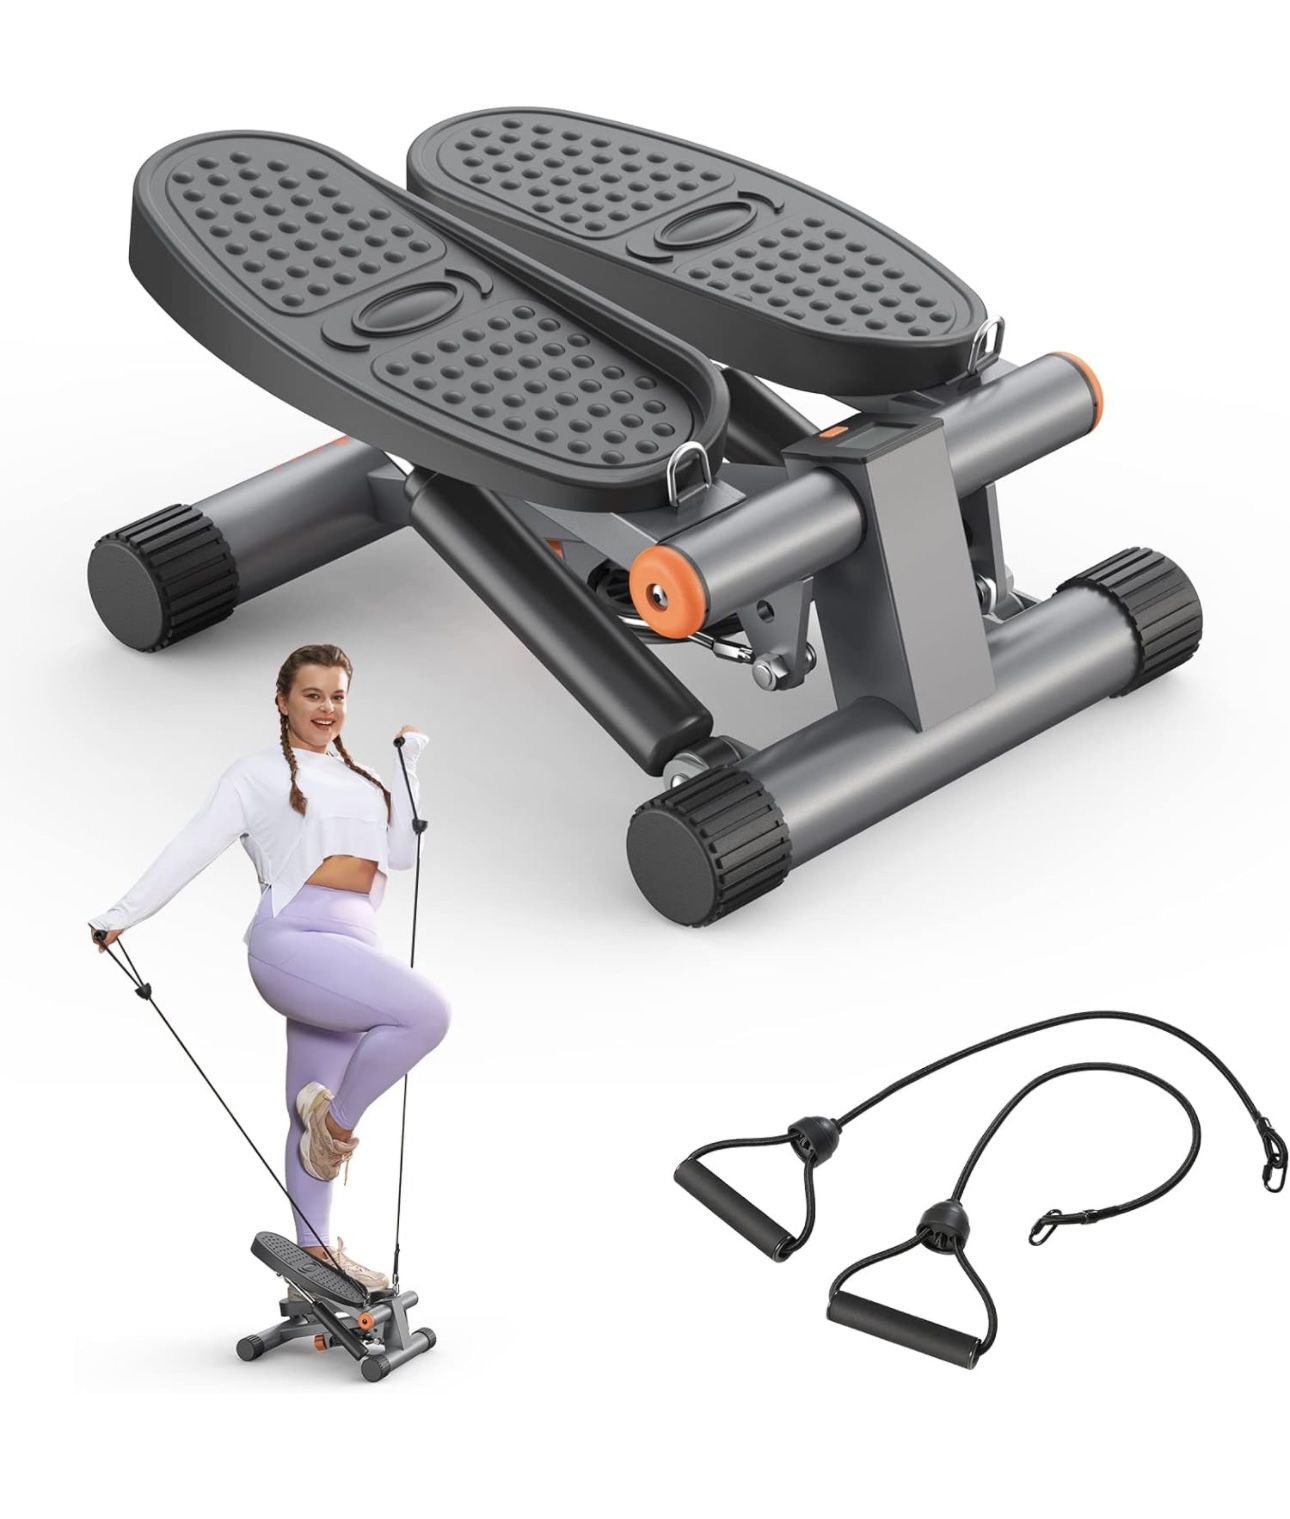 Niceday Stair Stepper For Exercise with Resistance Bands, Mini Stepper with 300LBS Loading Capacity